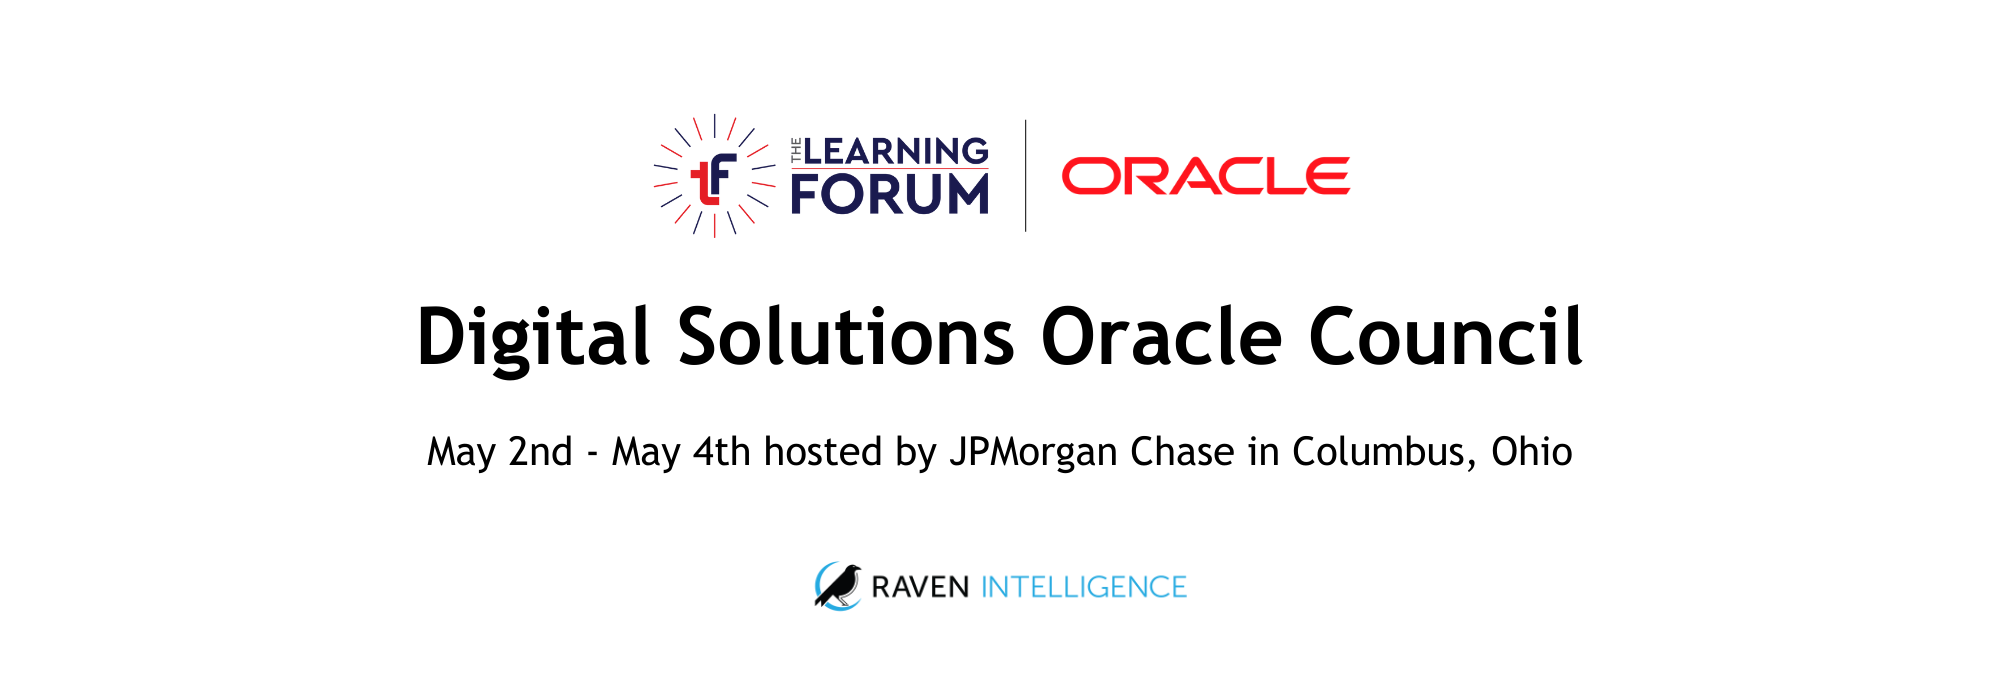 Digital Solutions Oracle Council